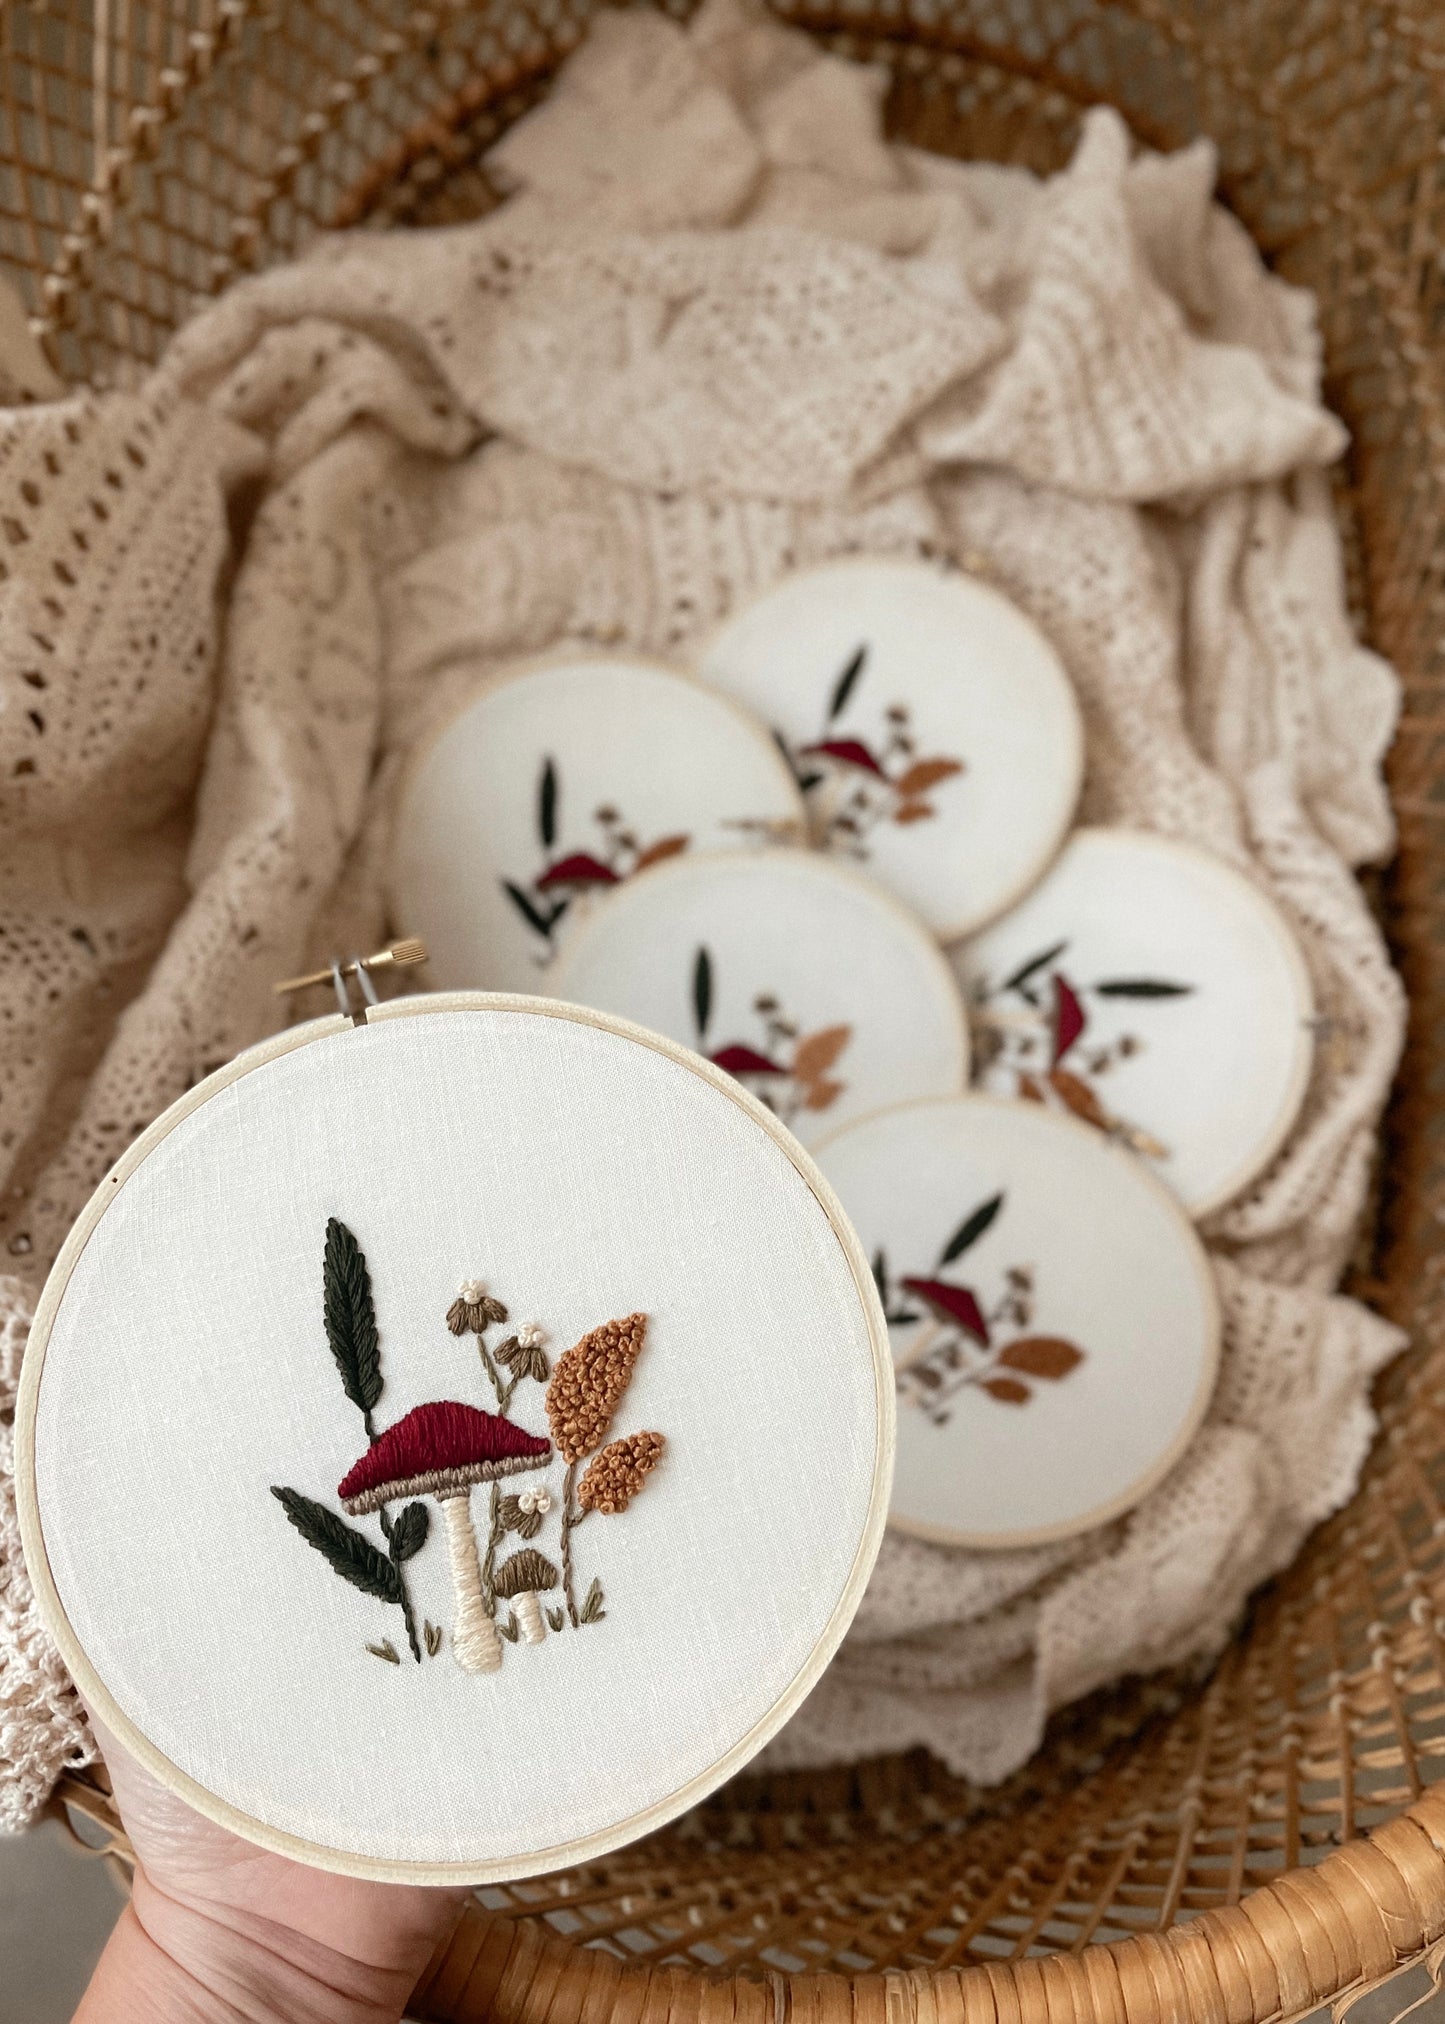 EMBROIDERY HOOPS